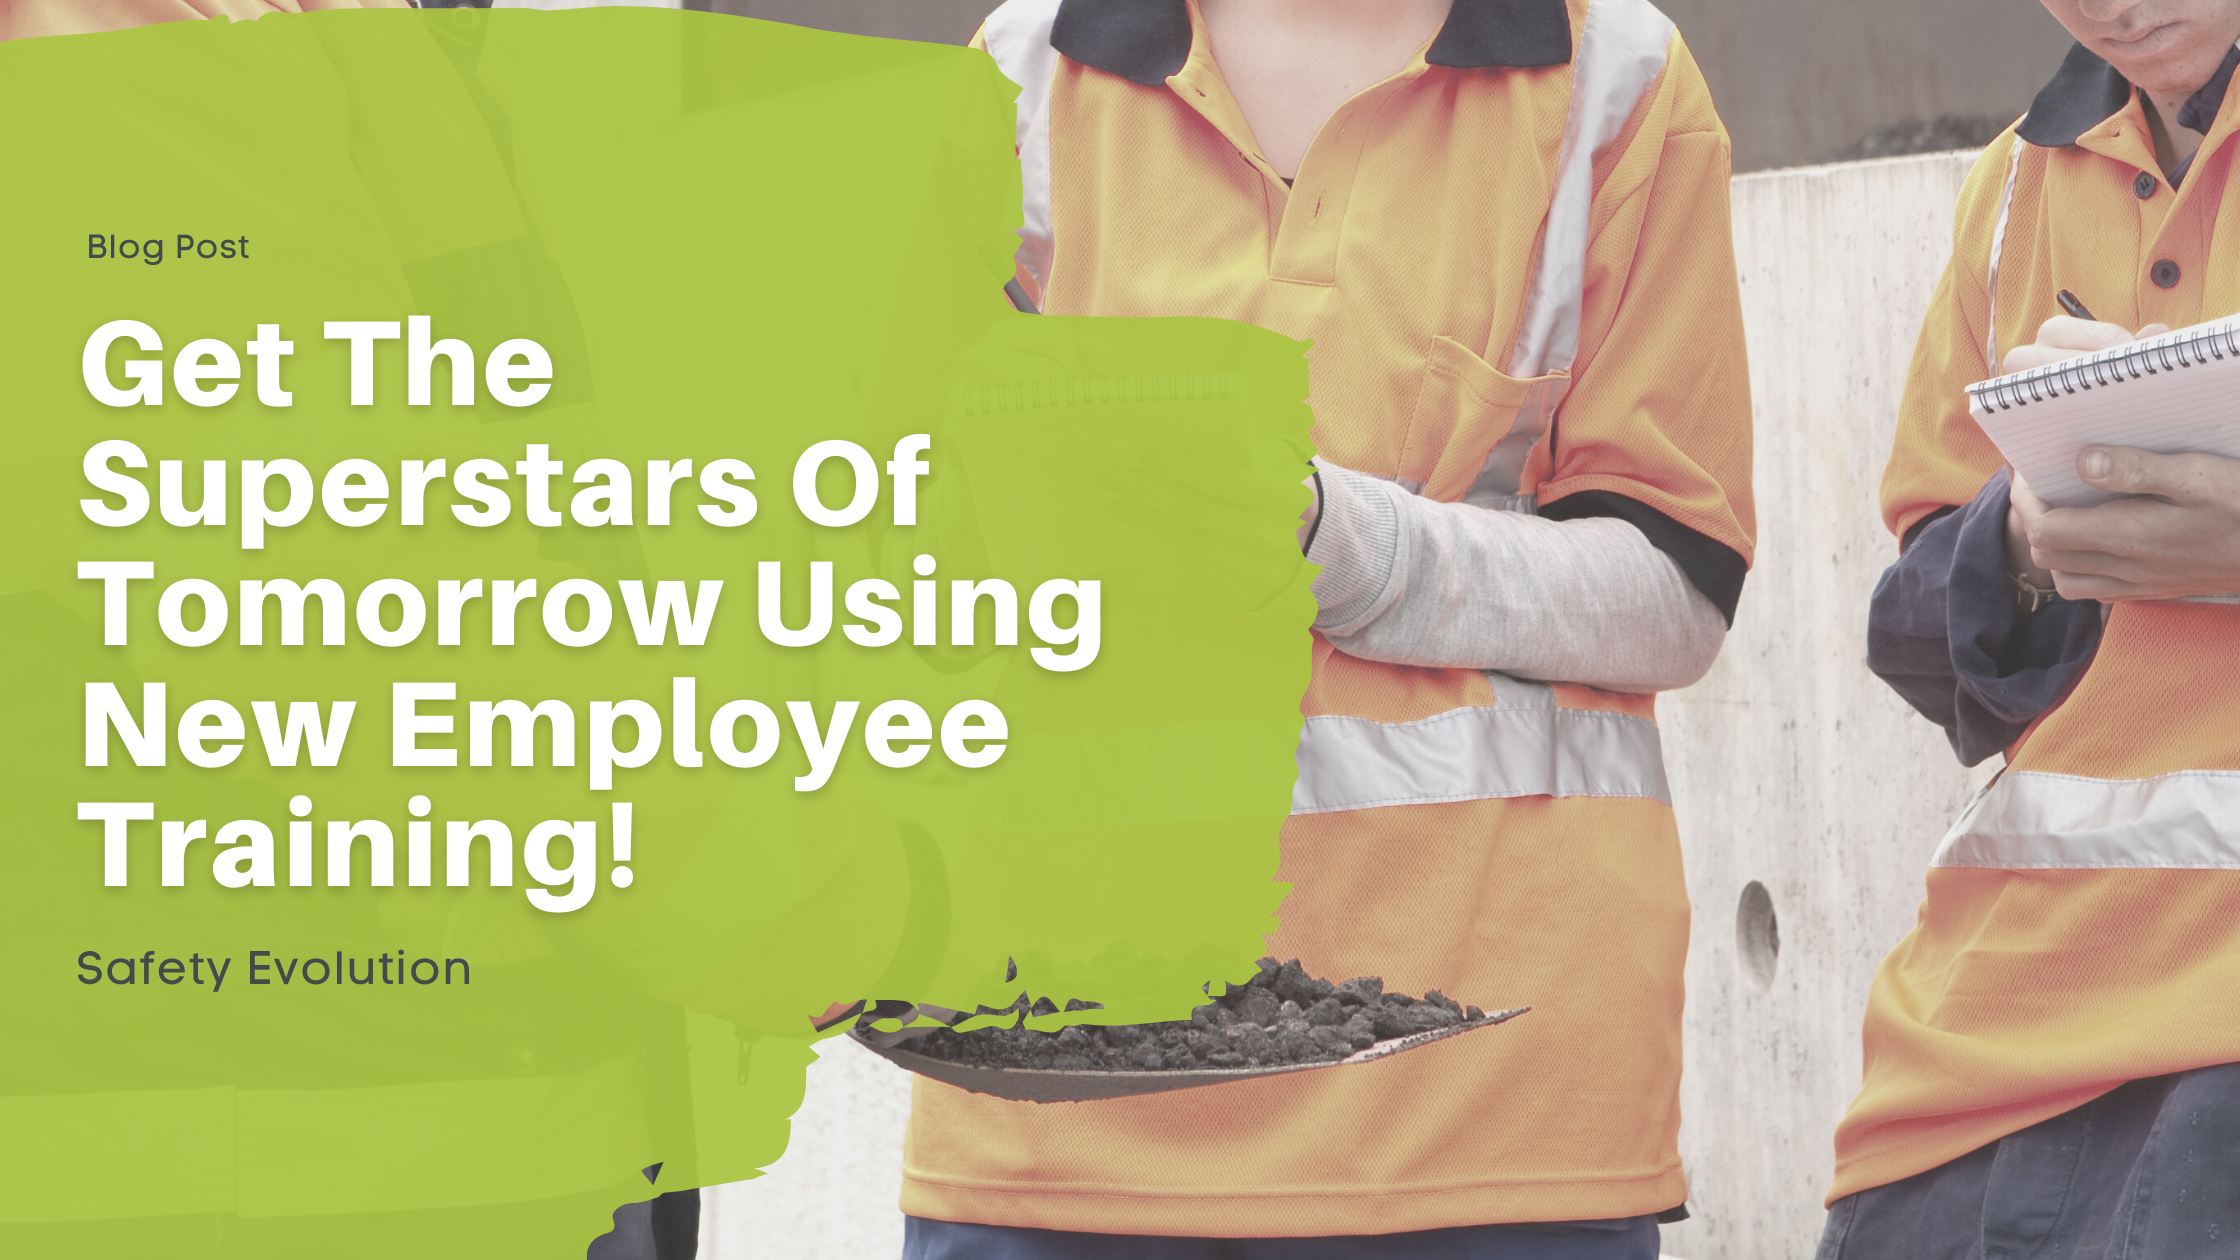 Get The Superstars Of Tomorrow Using New Employees Training!